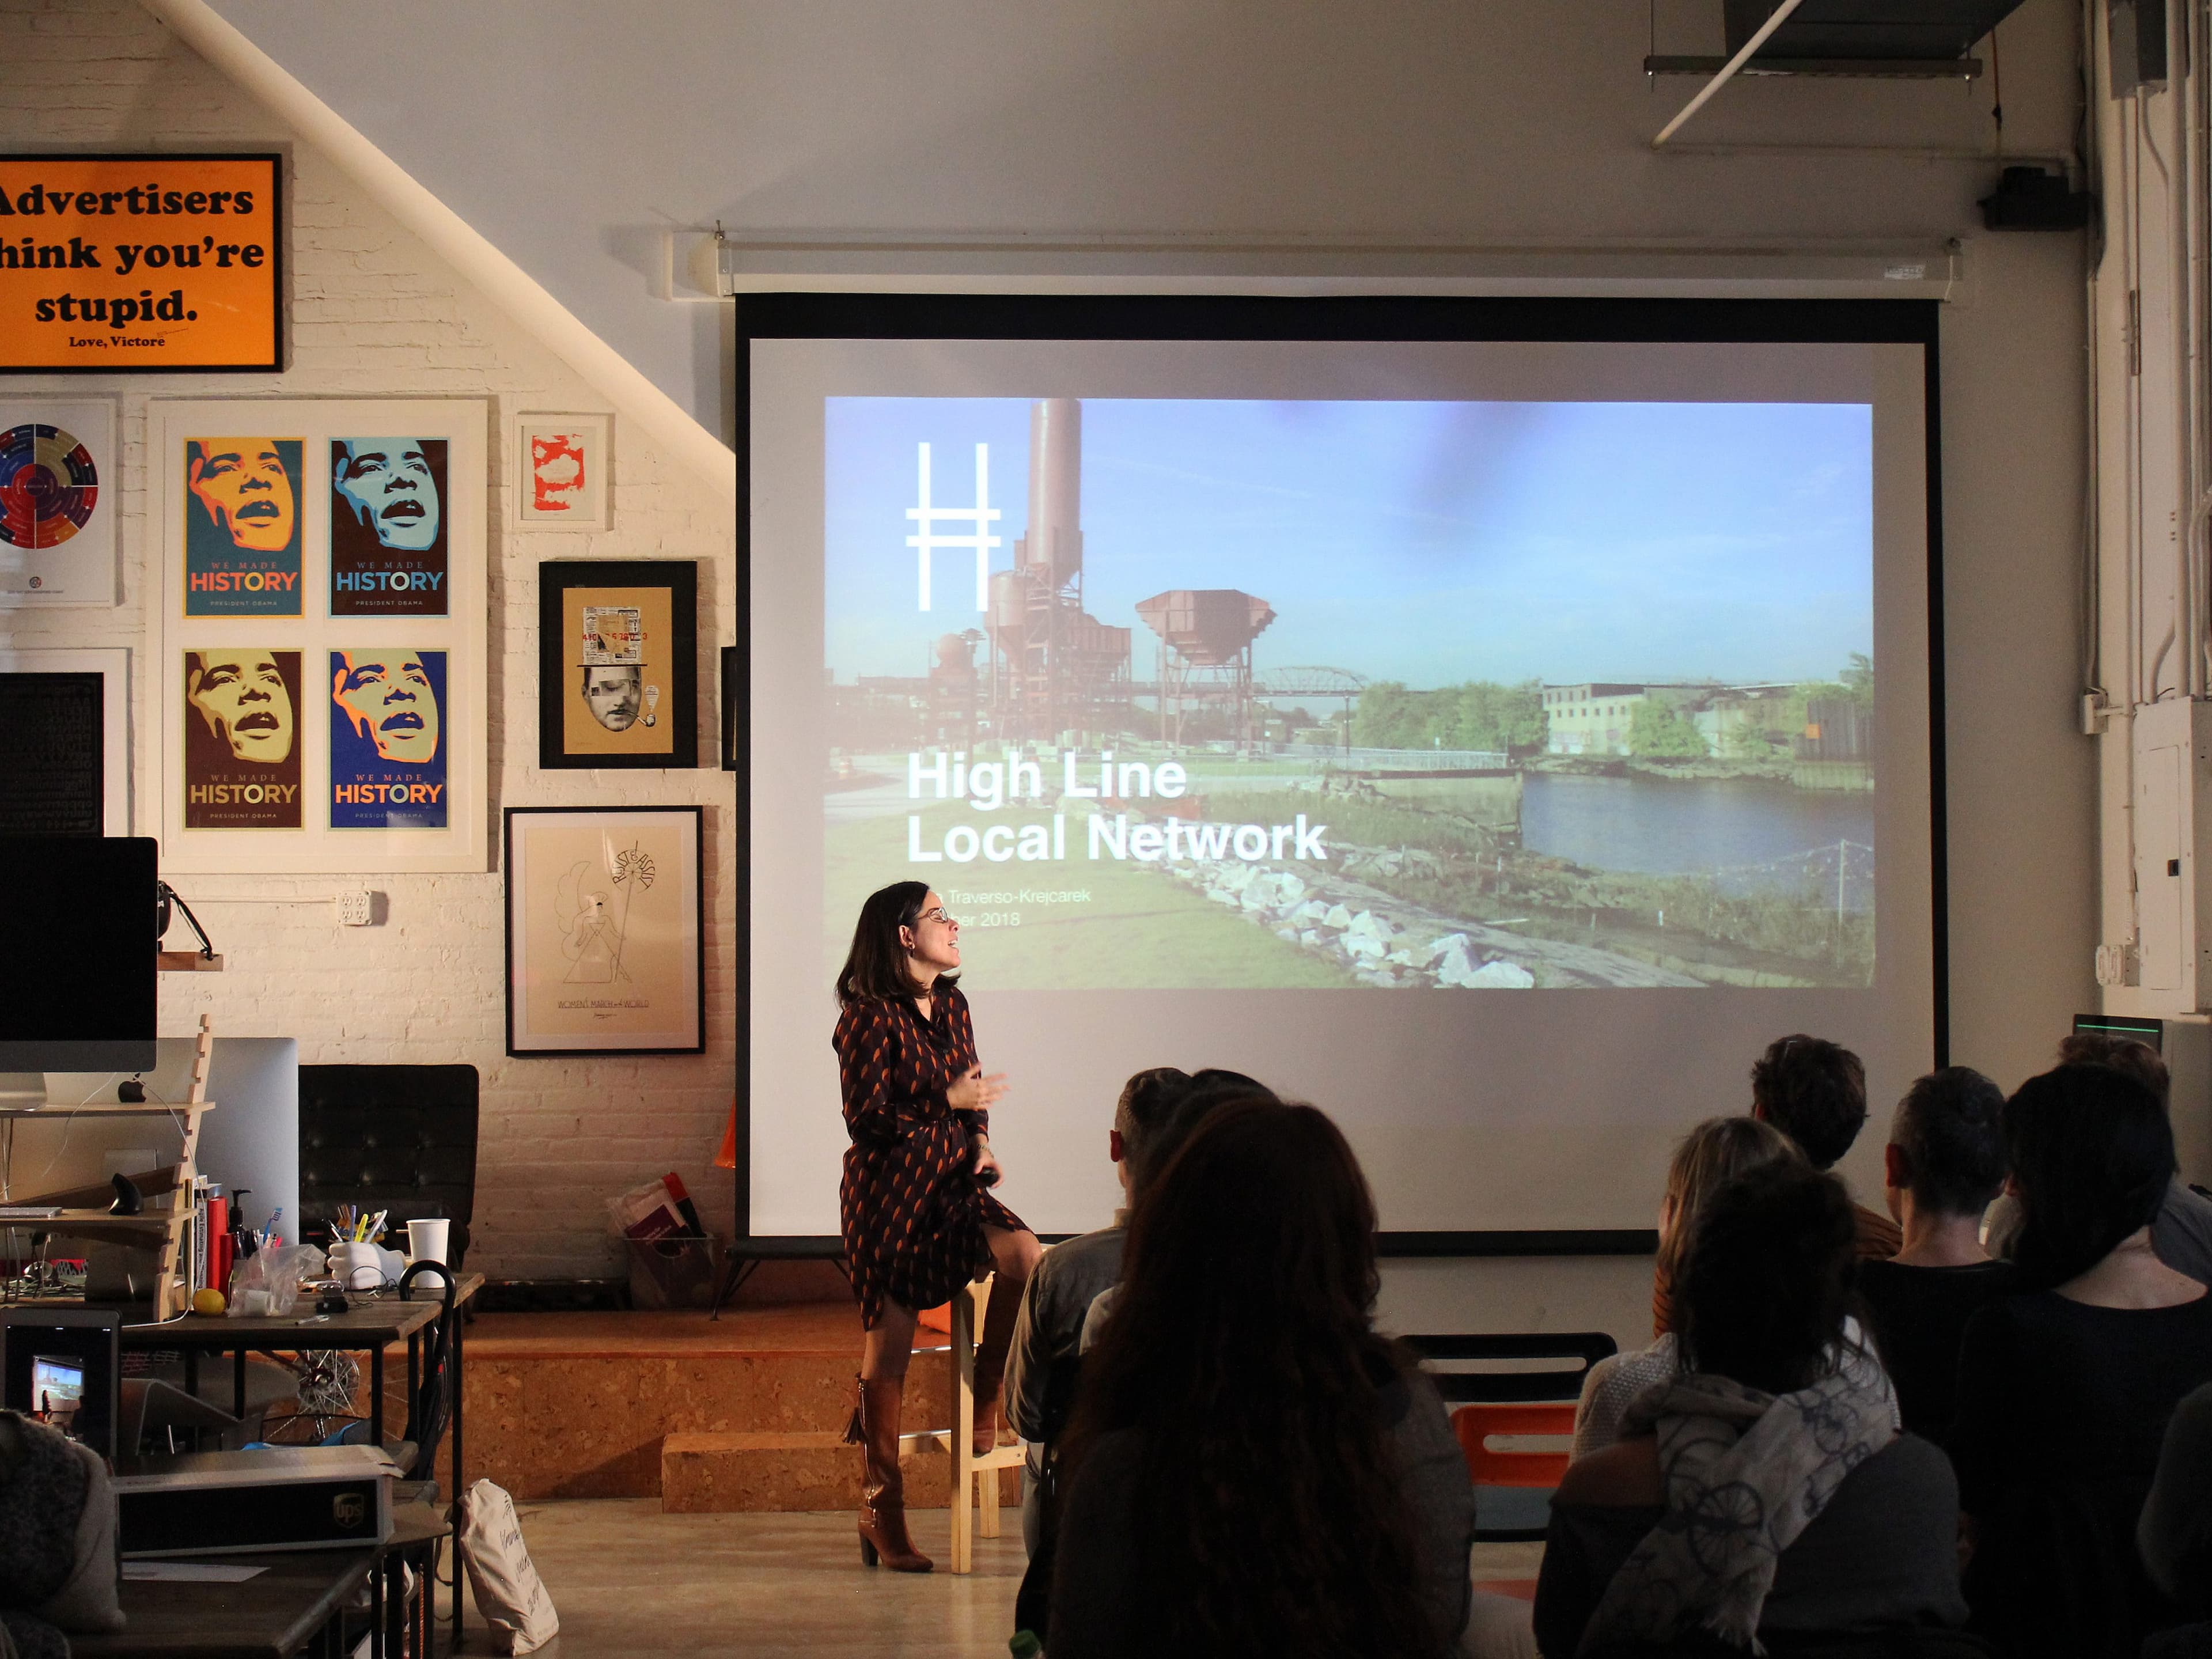 A woman stands in front of a seated audience, presenting a slideshow titled "High Line Local Network". The setting appears to be a creative studio with posters on the wall and bright natural light coming through the windows.